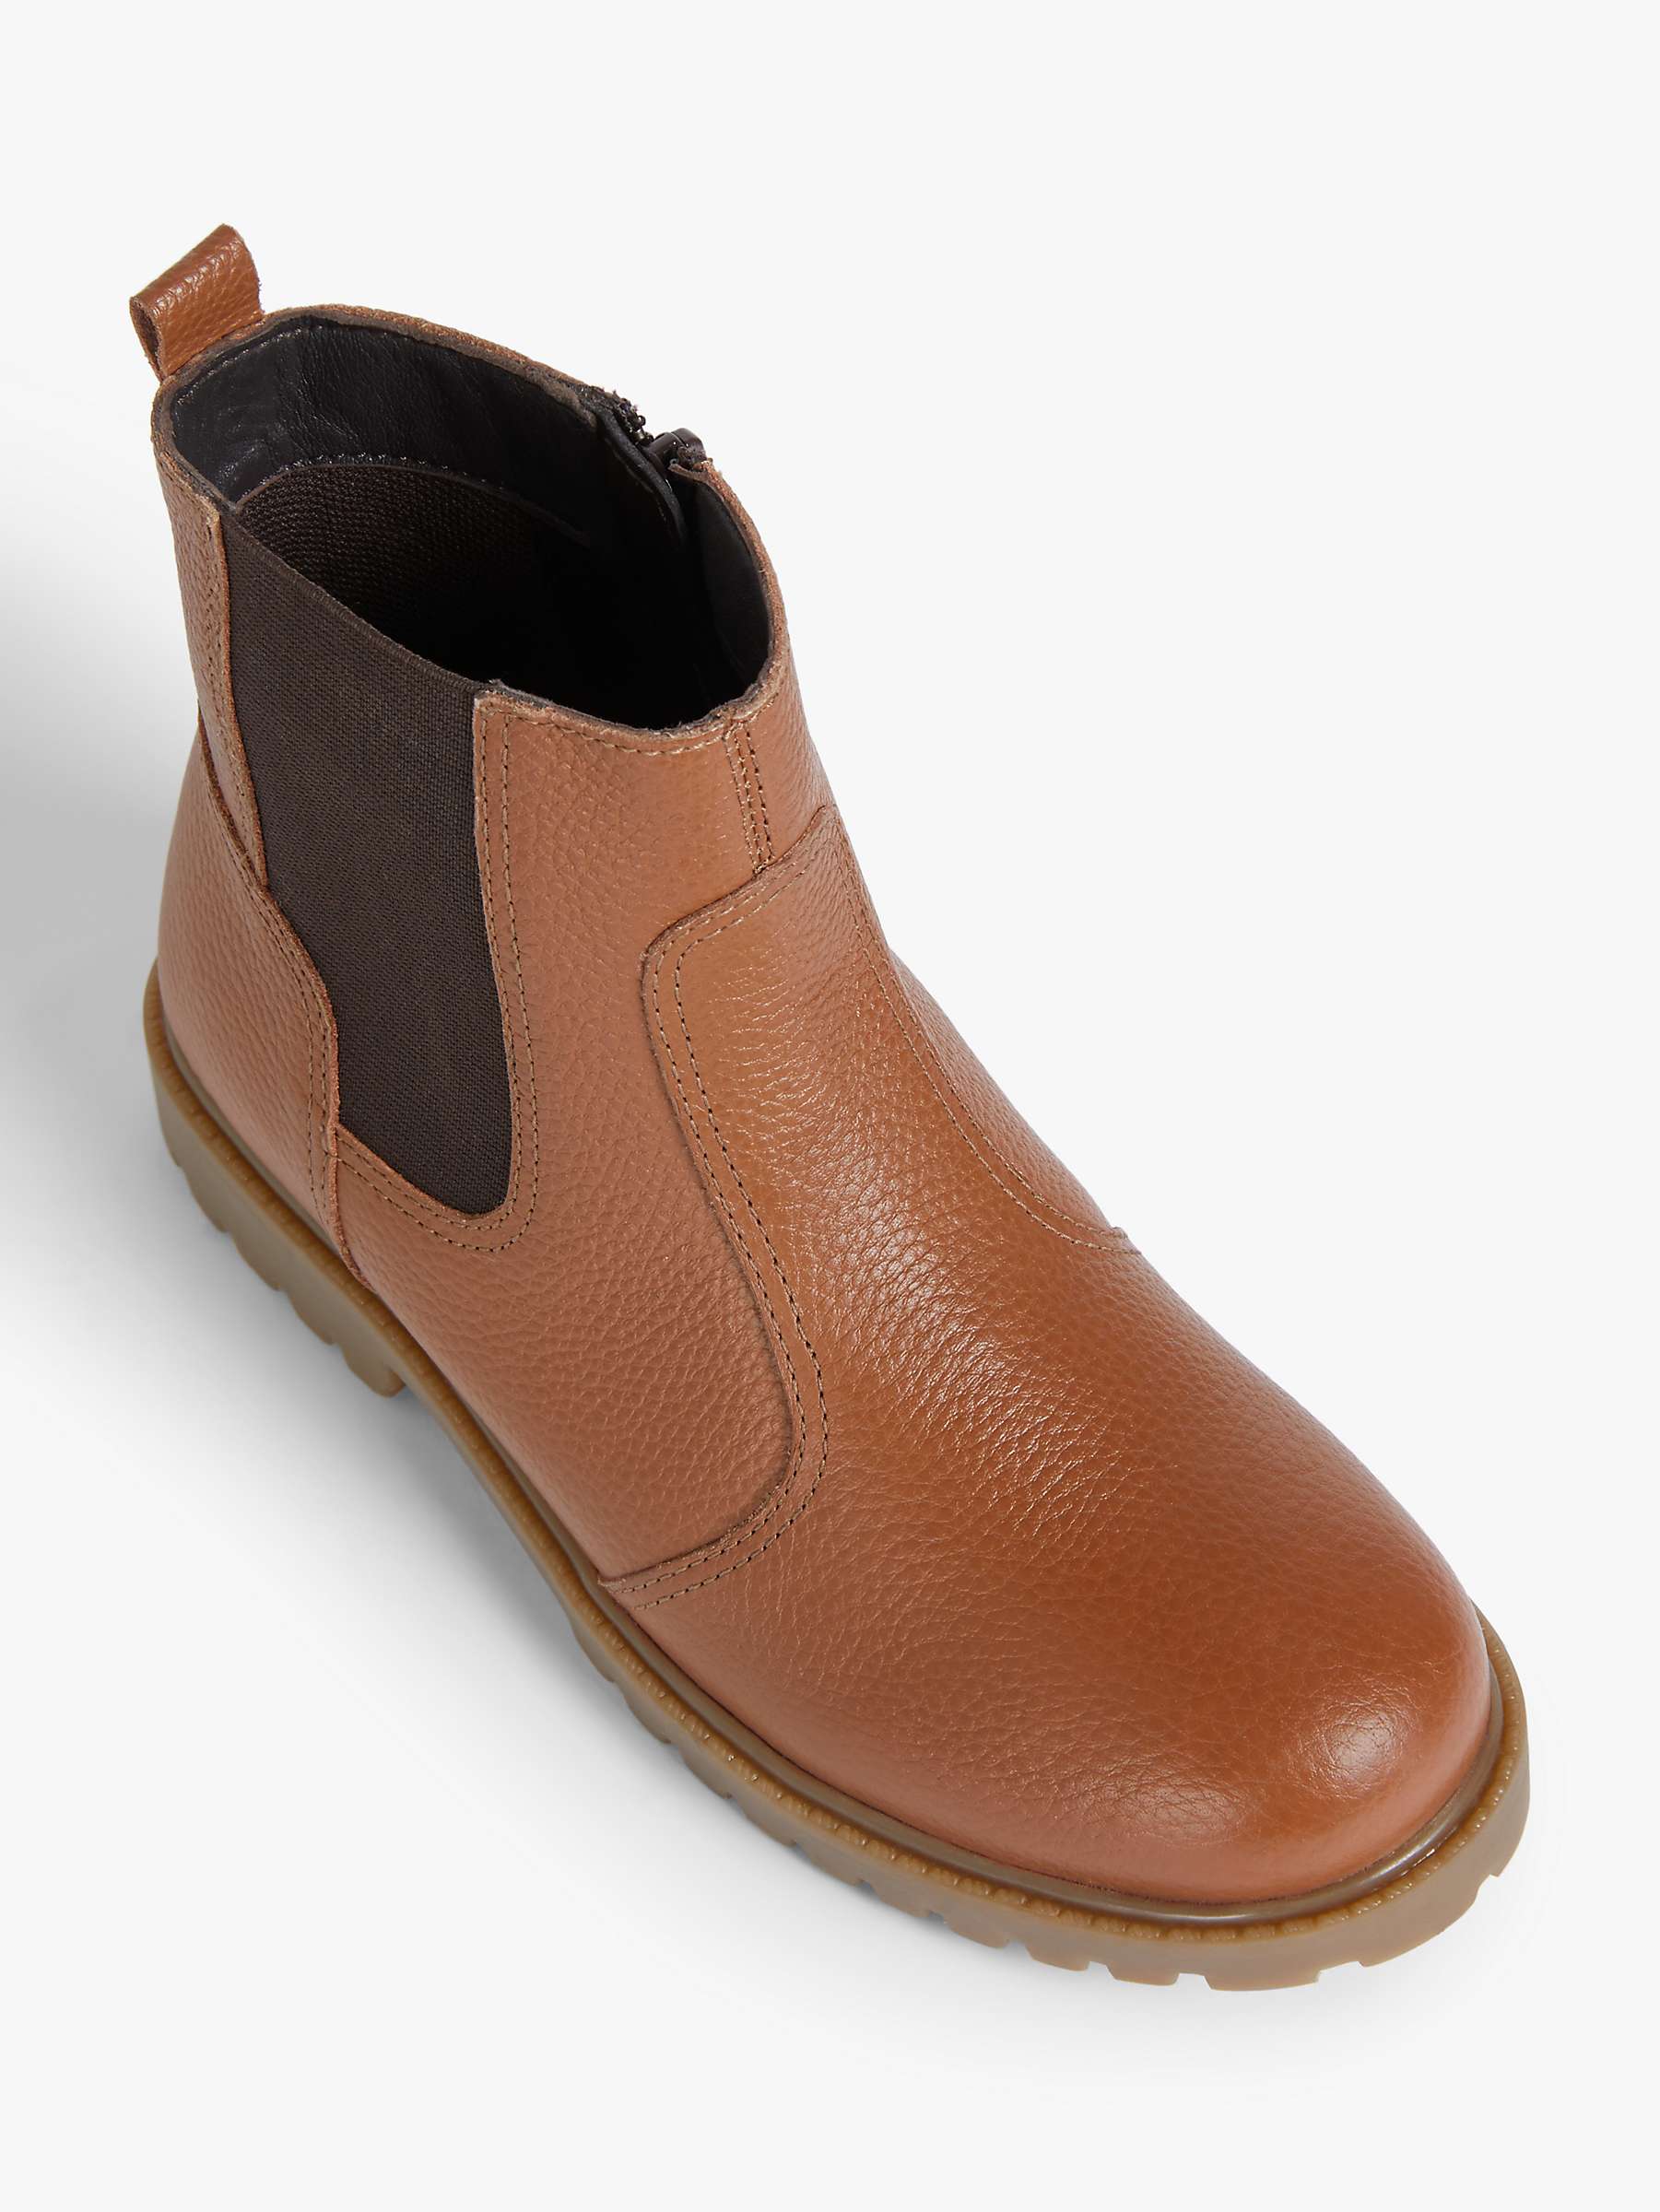 Buy John Lewis Kids' Leather Chelsea Boots Online at johnlewis.com